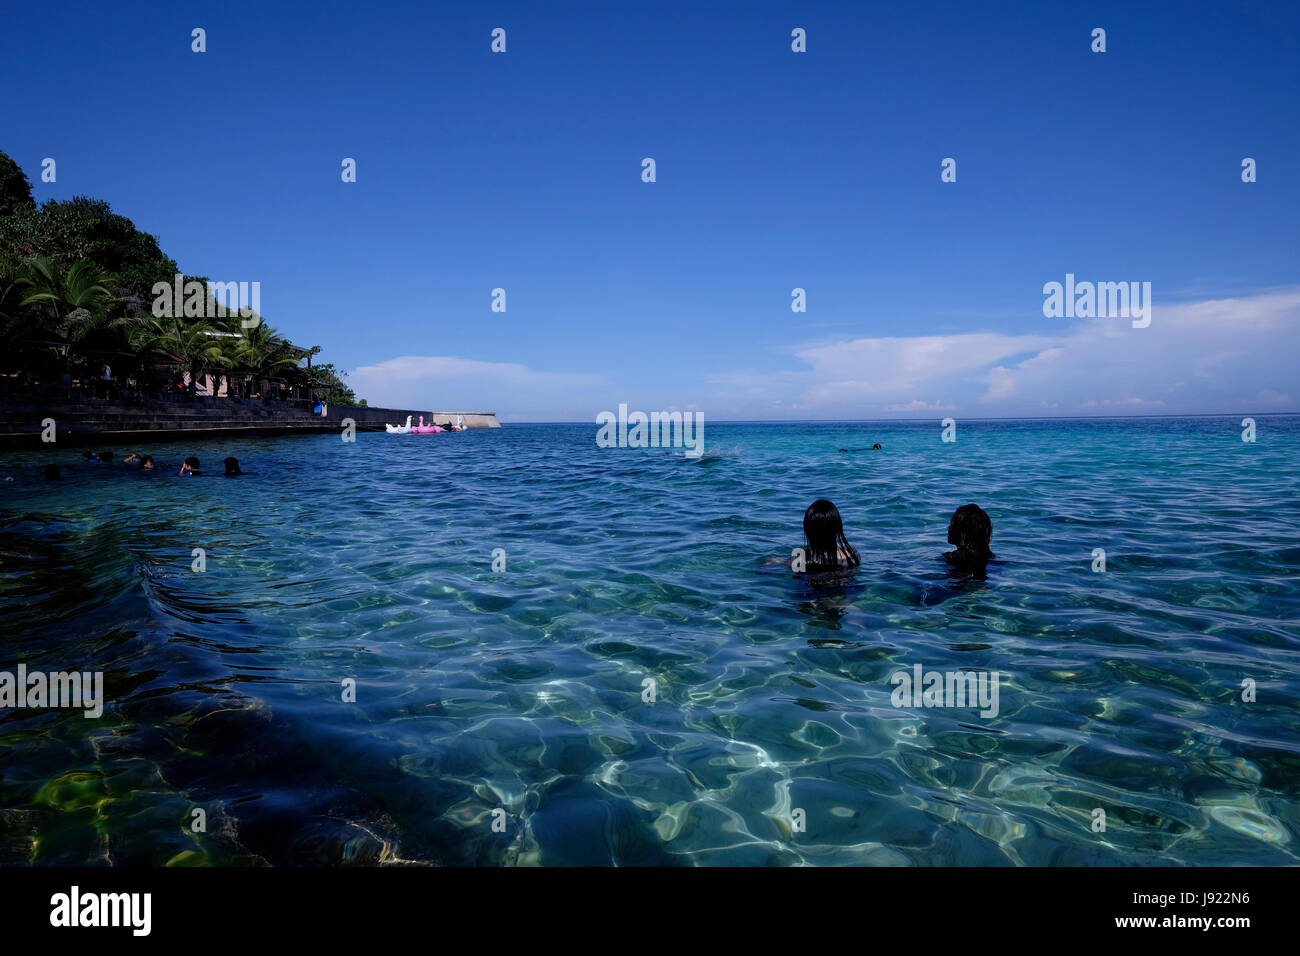 People bathing in Salagdoong Beach in the island of Siquijor located in the Central Visayas region of the Philippines Stock Photo